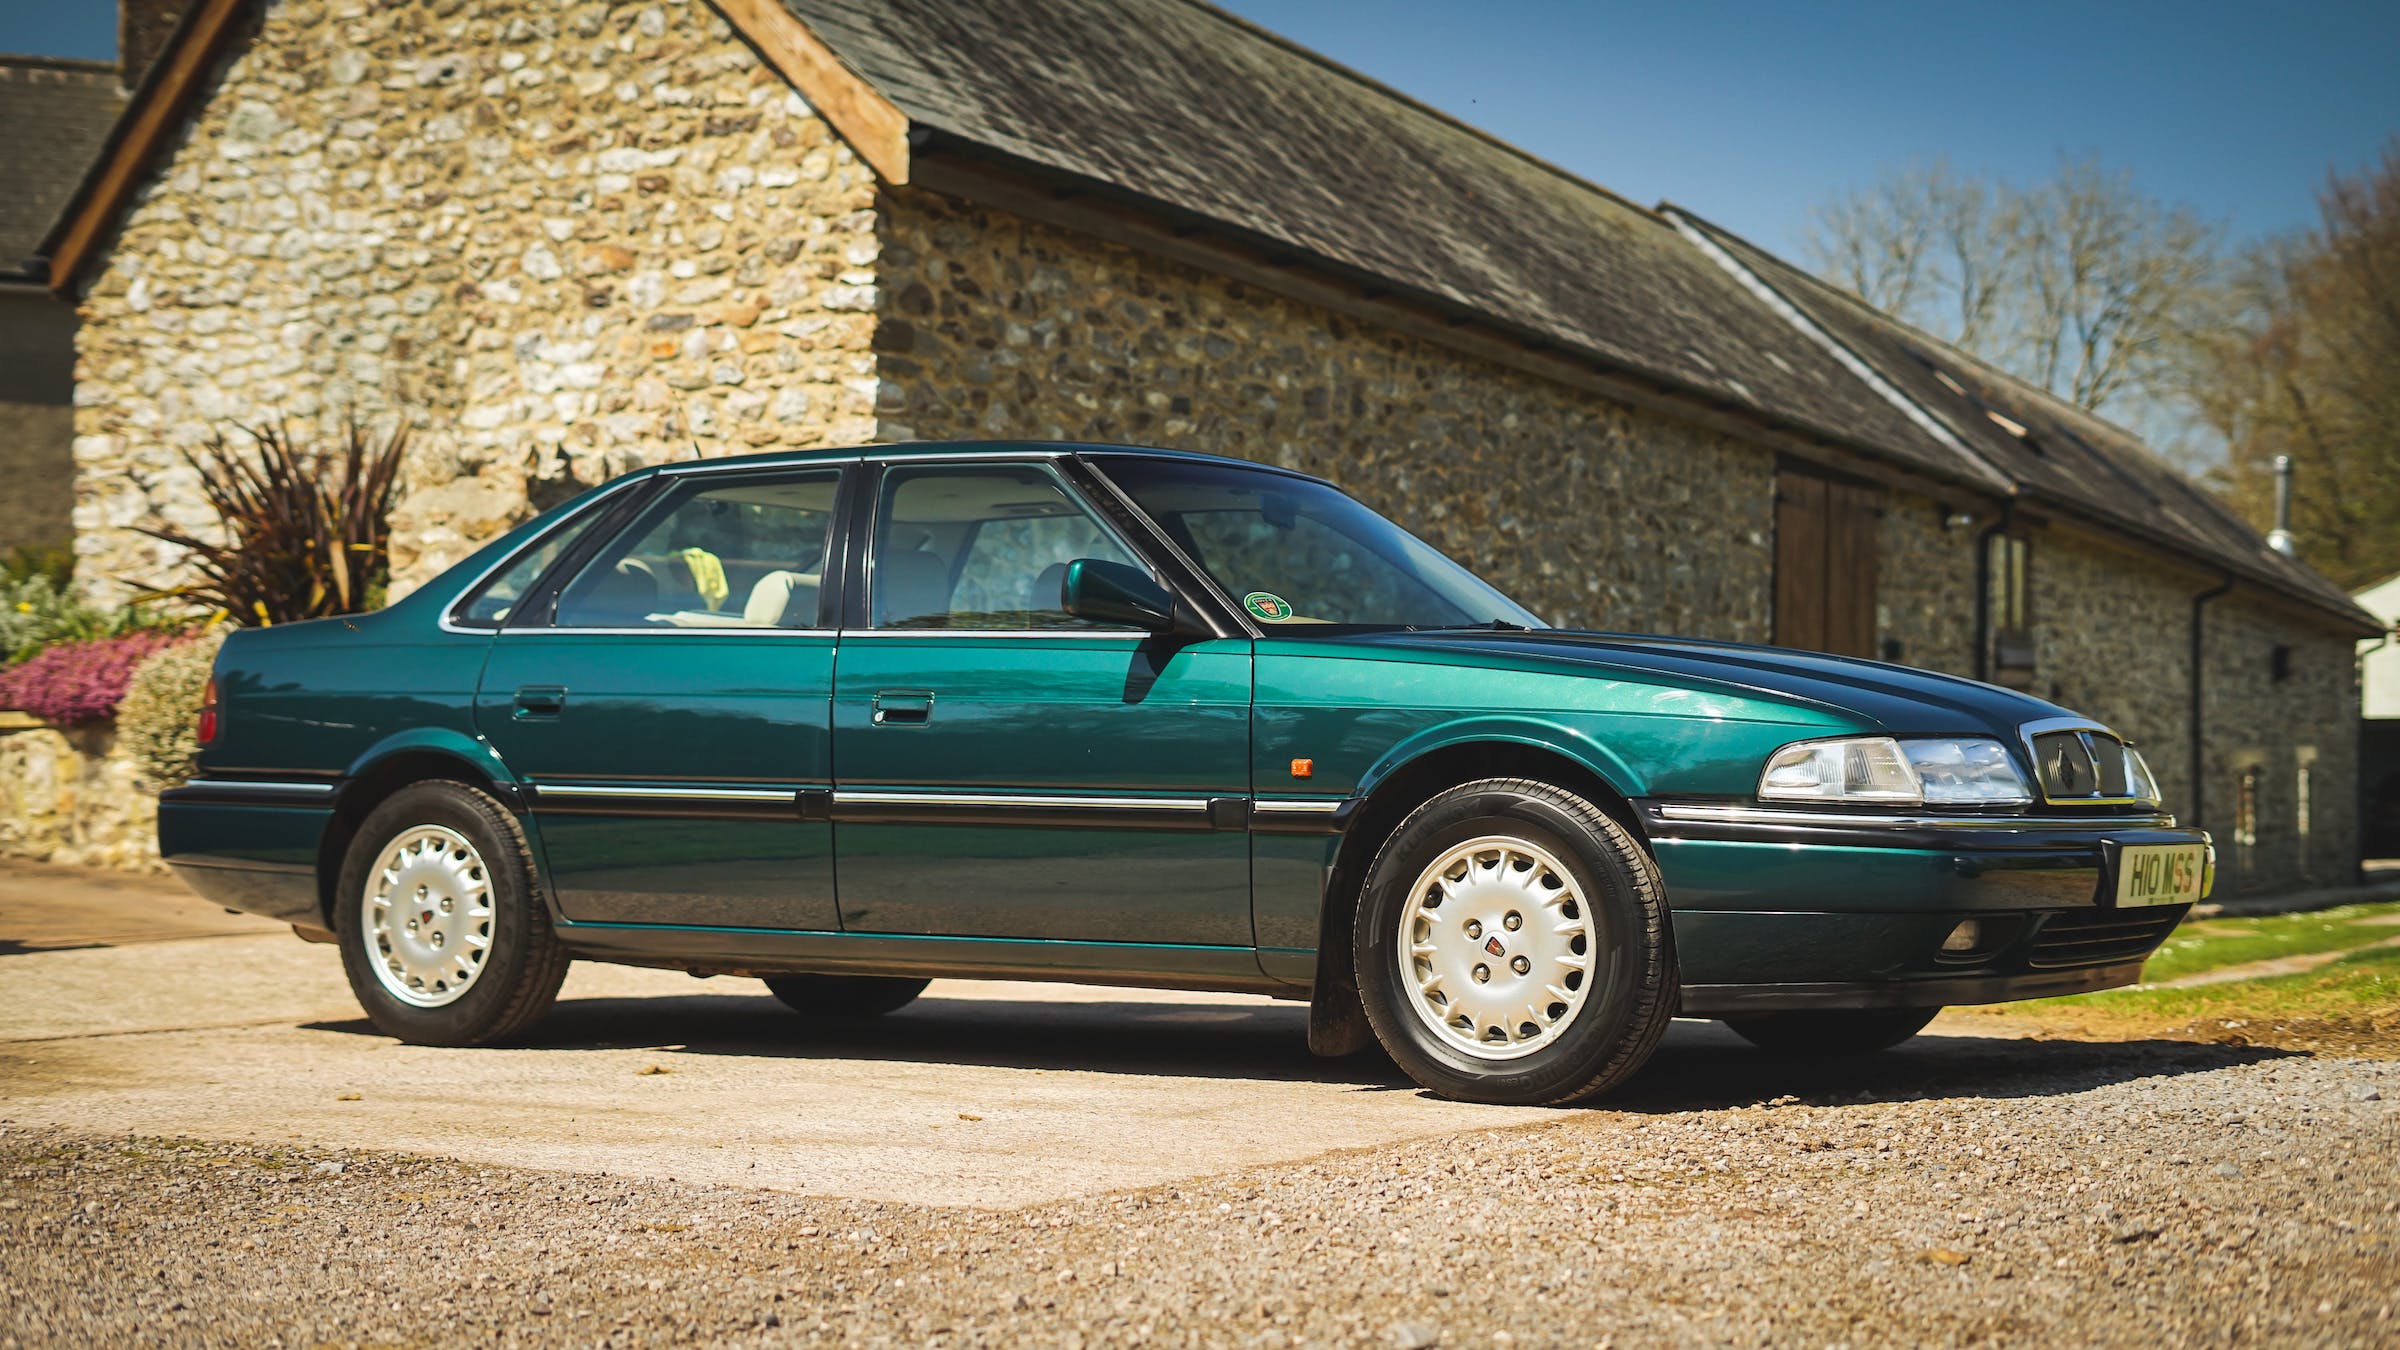 Regal Rover 827 up for auction during the Queen’s Jubilee